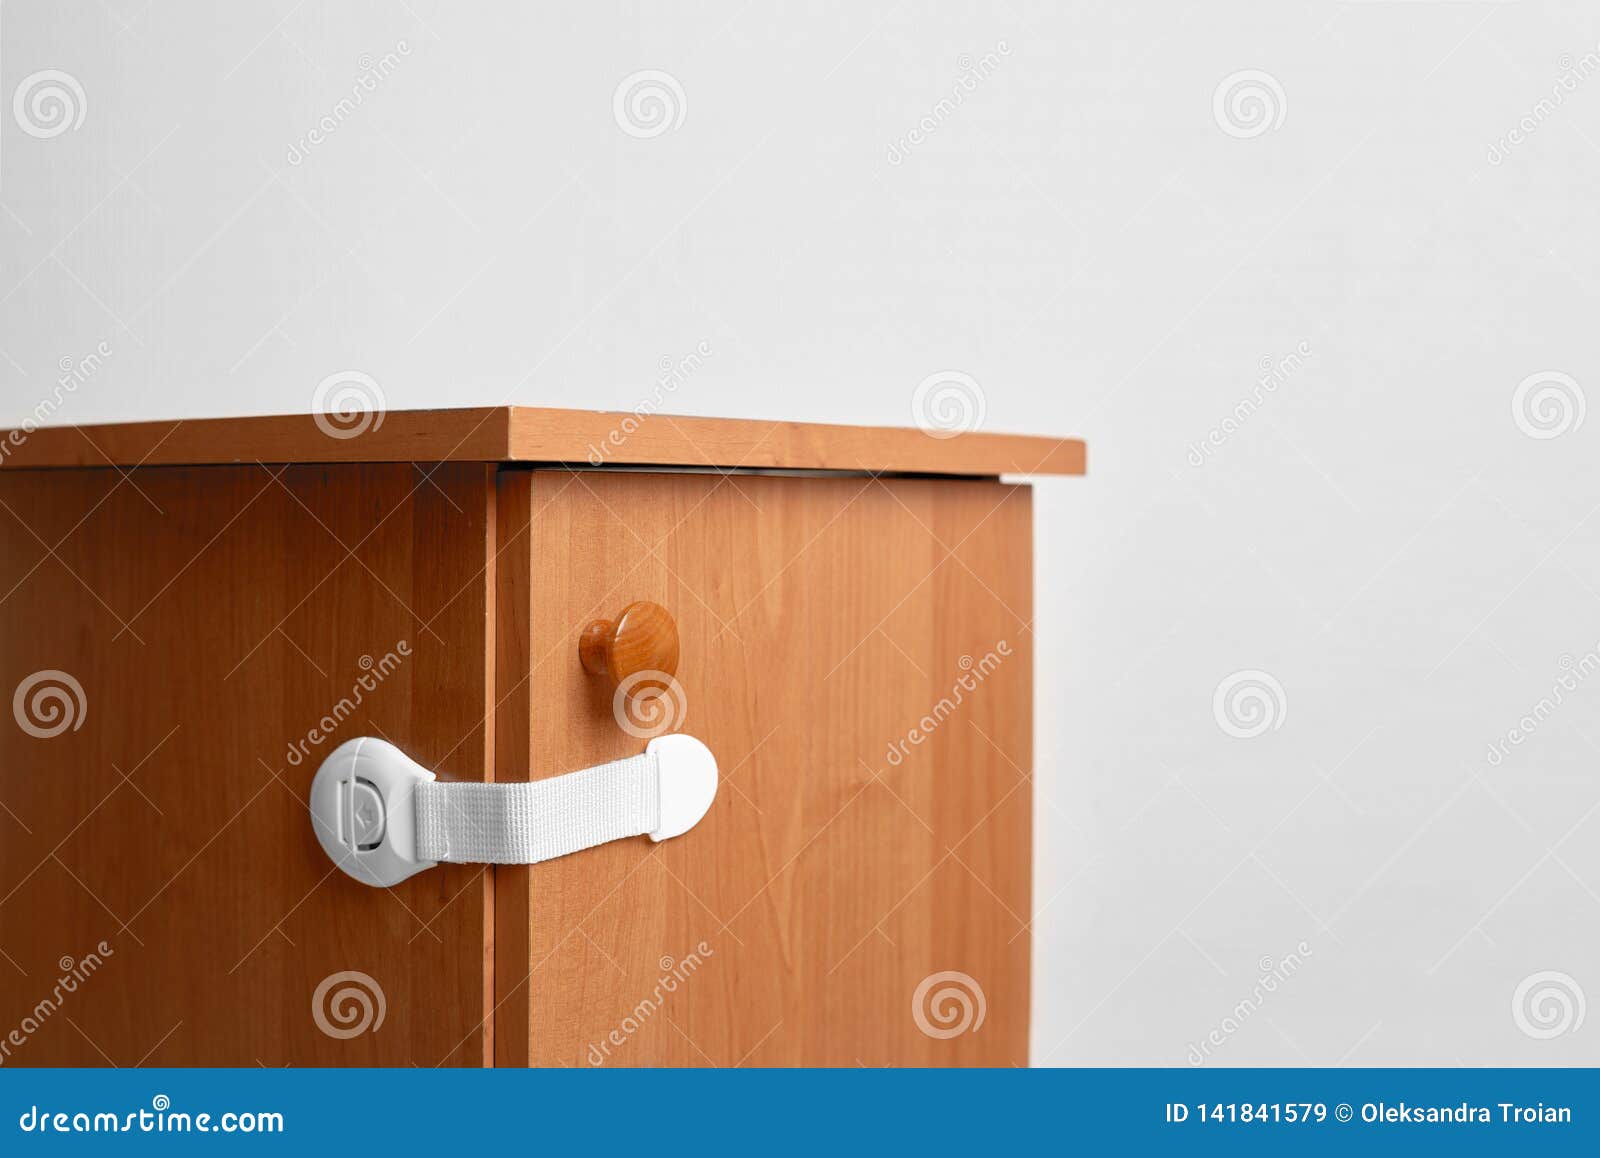 https://thumbs.dreamstime.com/z/bedside-table-wooden-baby-proofing-cabinet-lock-home-child-safety-141841579.jpg